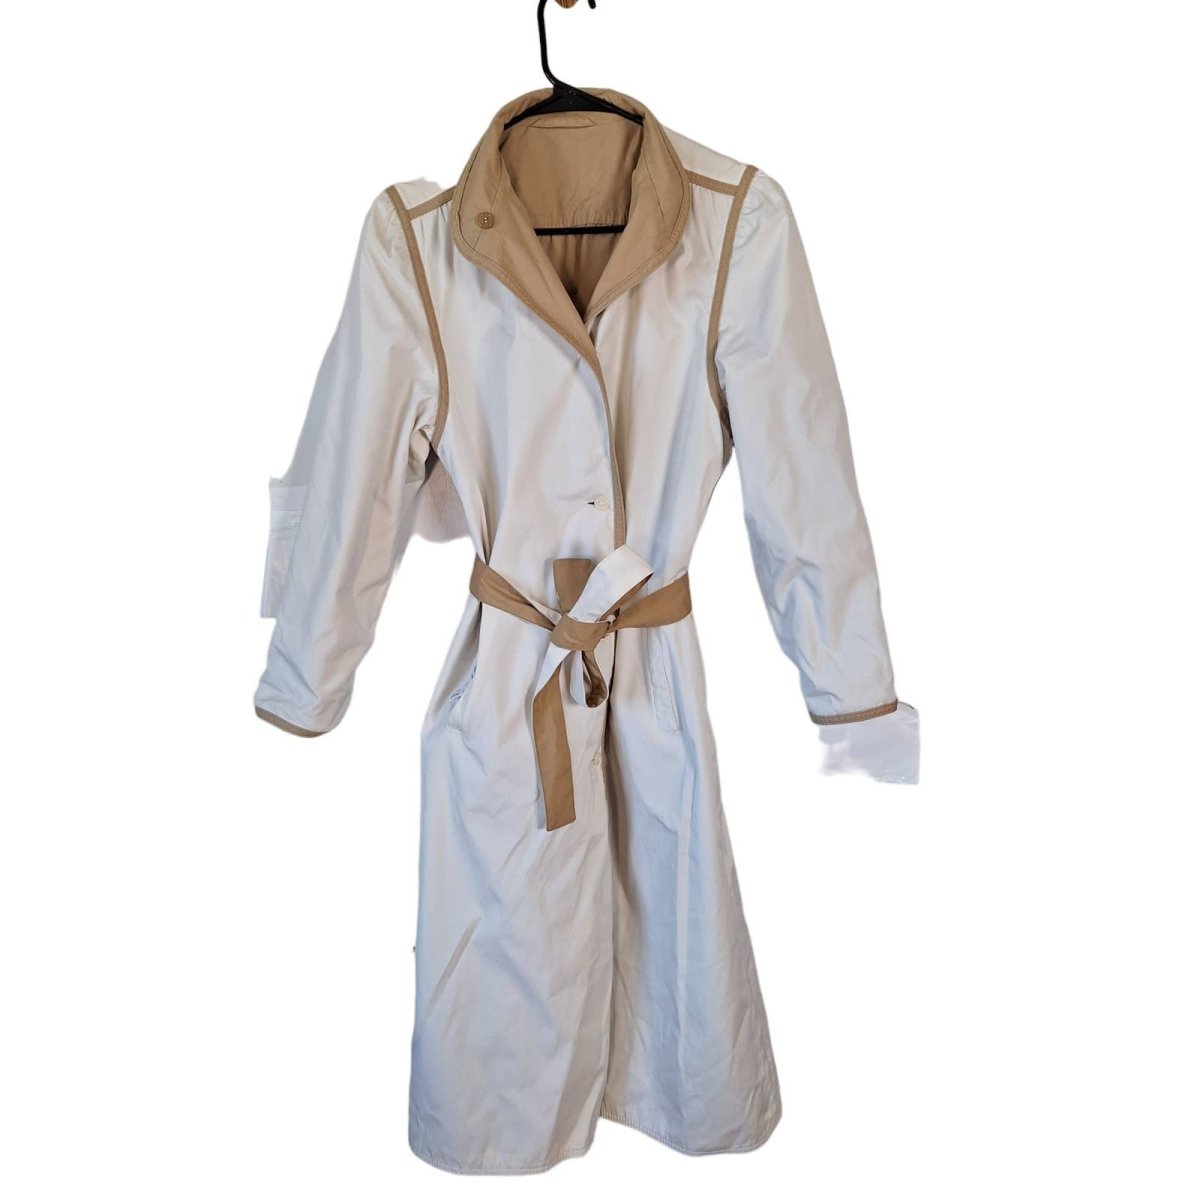 Vintage 80s Reversible Cream/Tan Puff Sleeve Trench Coat Women's Size 4 Small - themallvintage The Mall Vintage